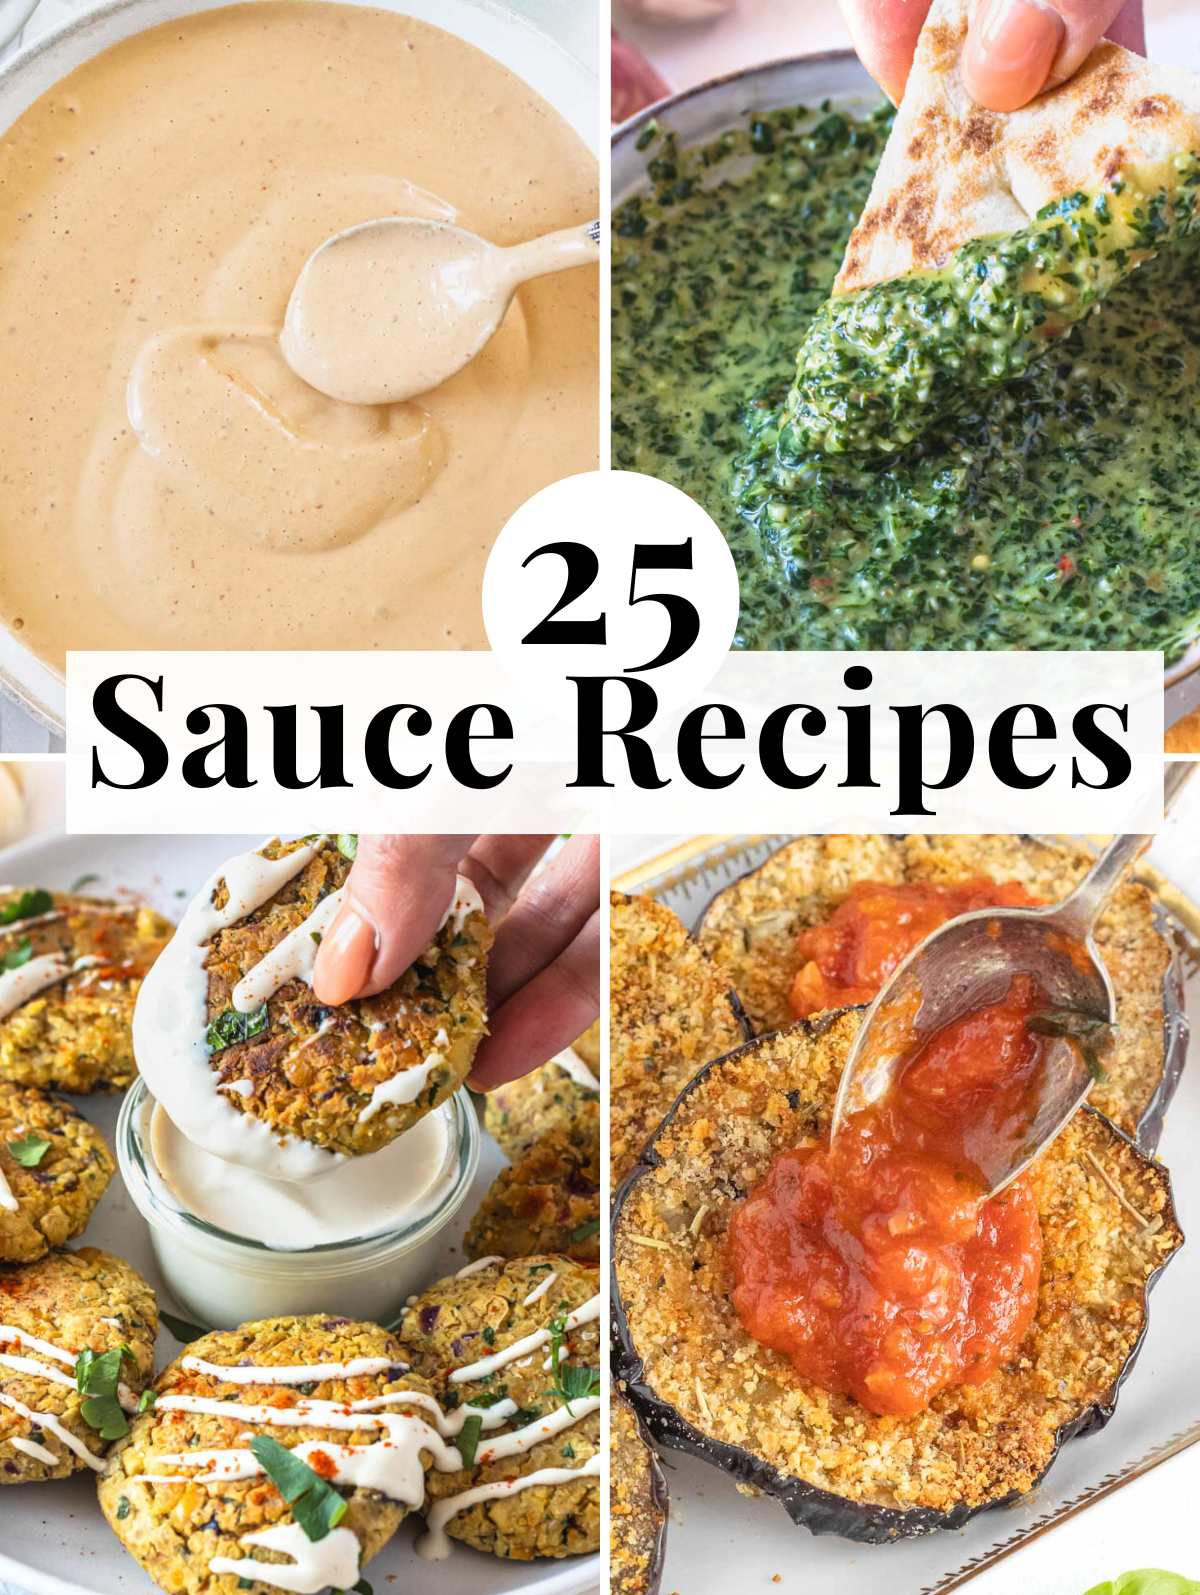 Easy sauce recipes for salads, protein, and pasta